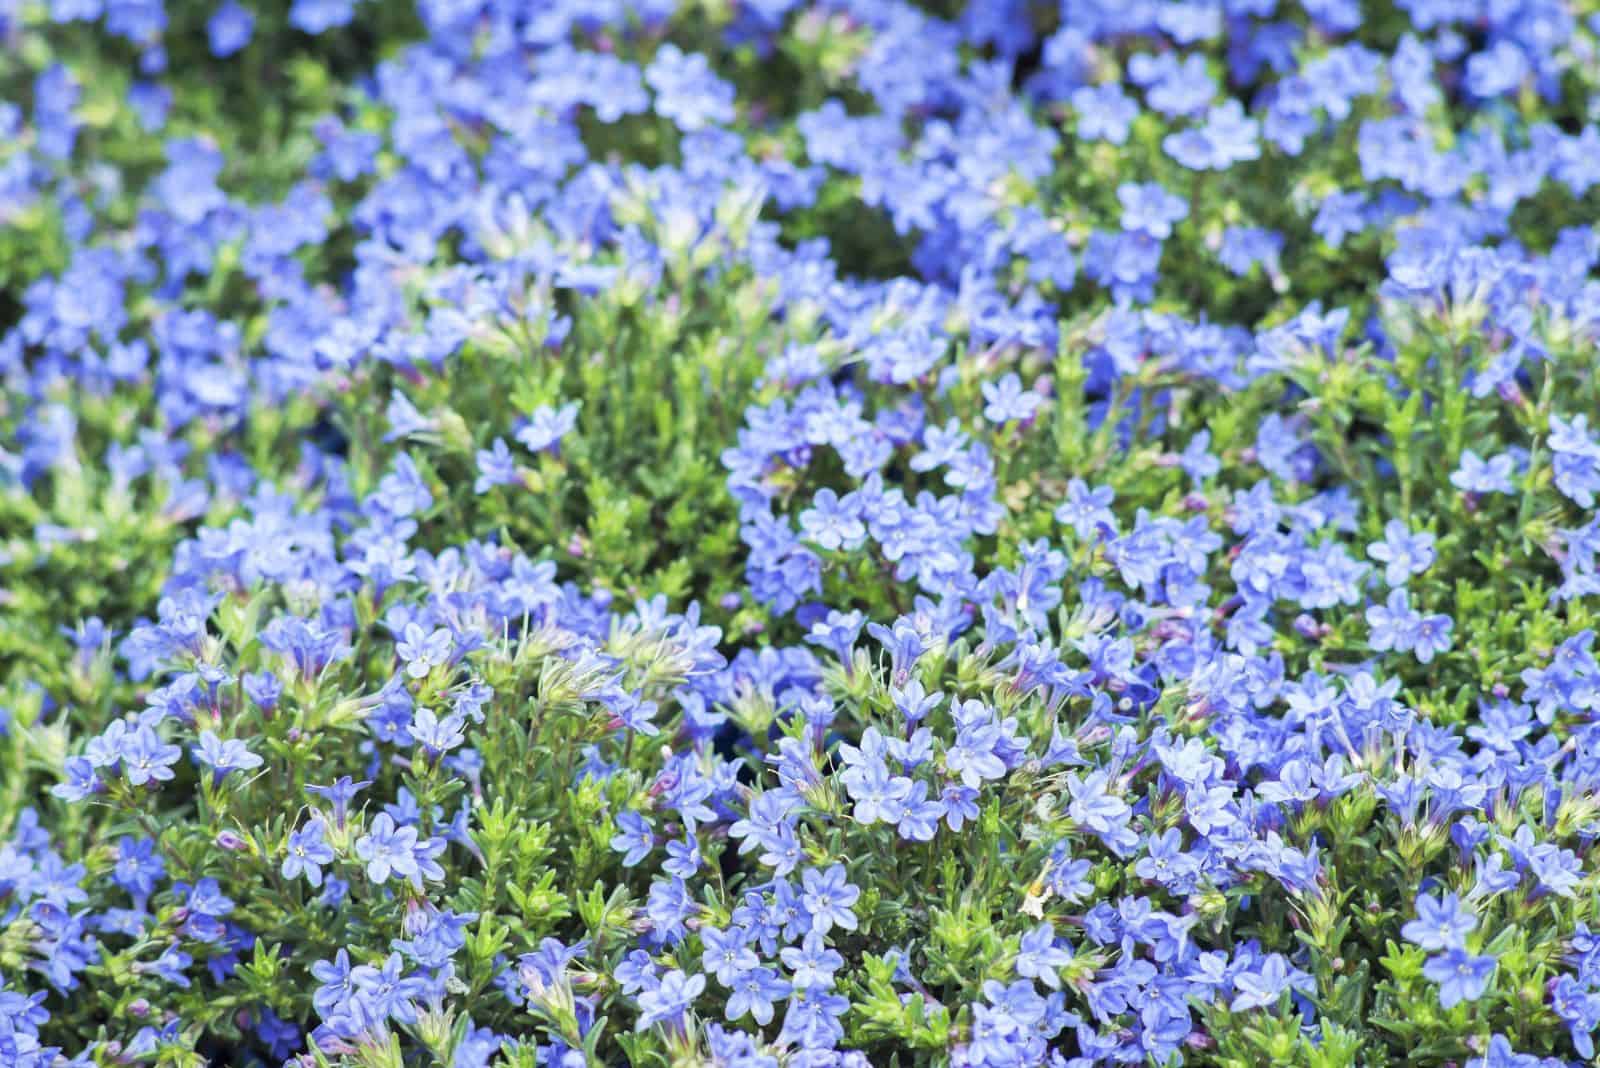 Don’t Stay Off The Lawn, Grow These 11 Walkable Ground Cover Plants Instead